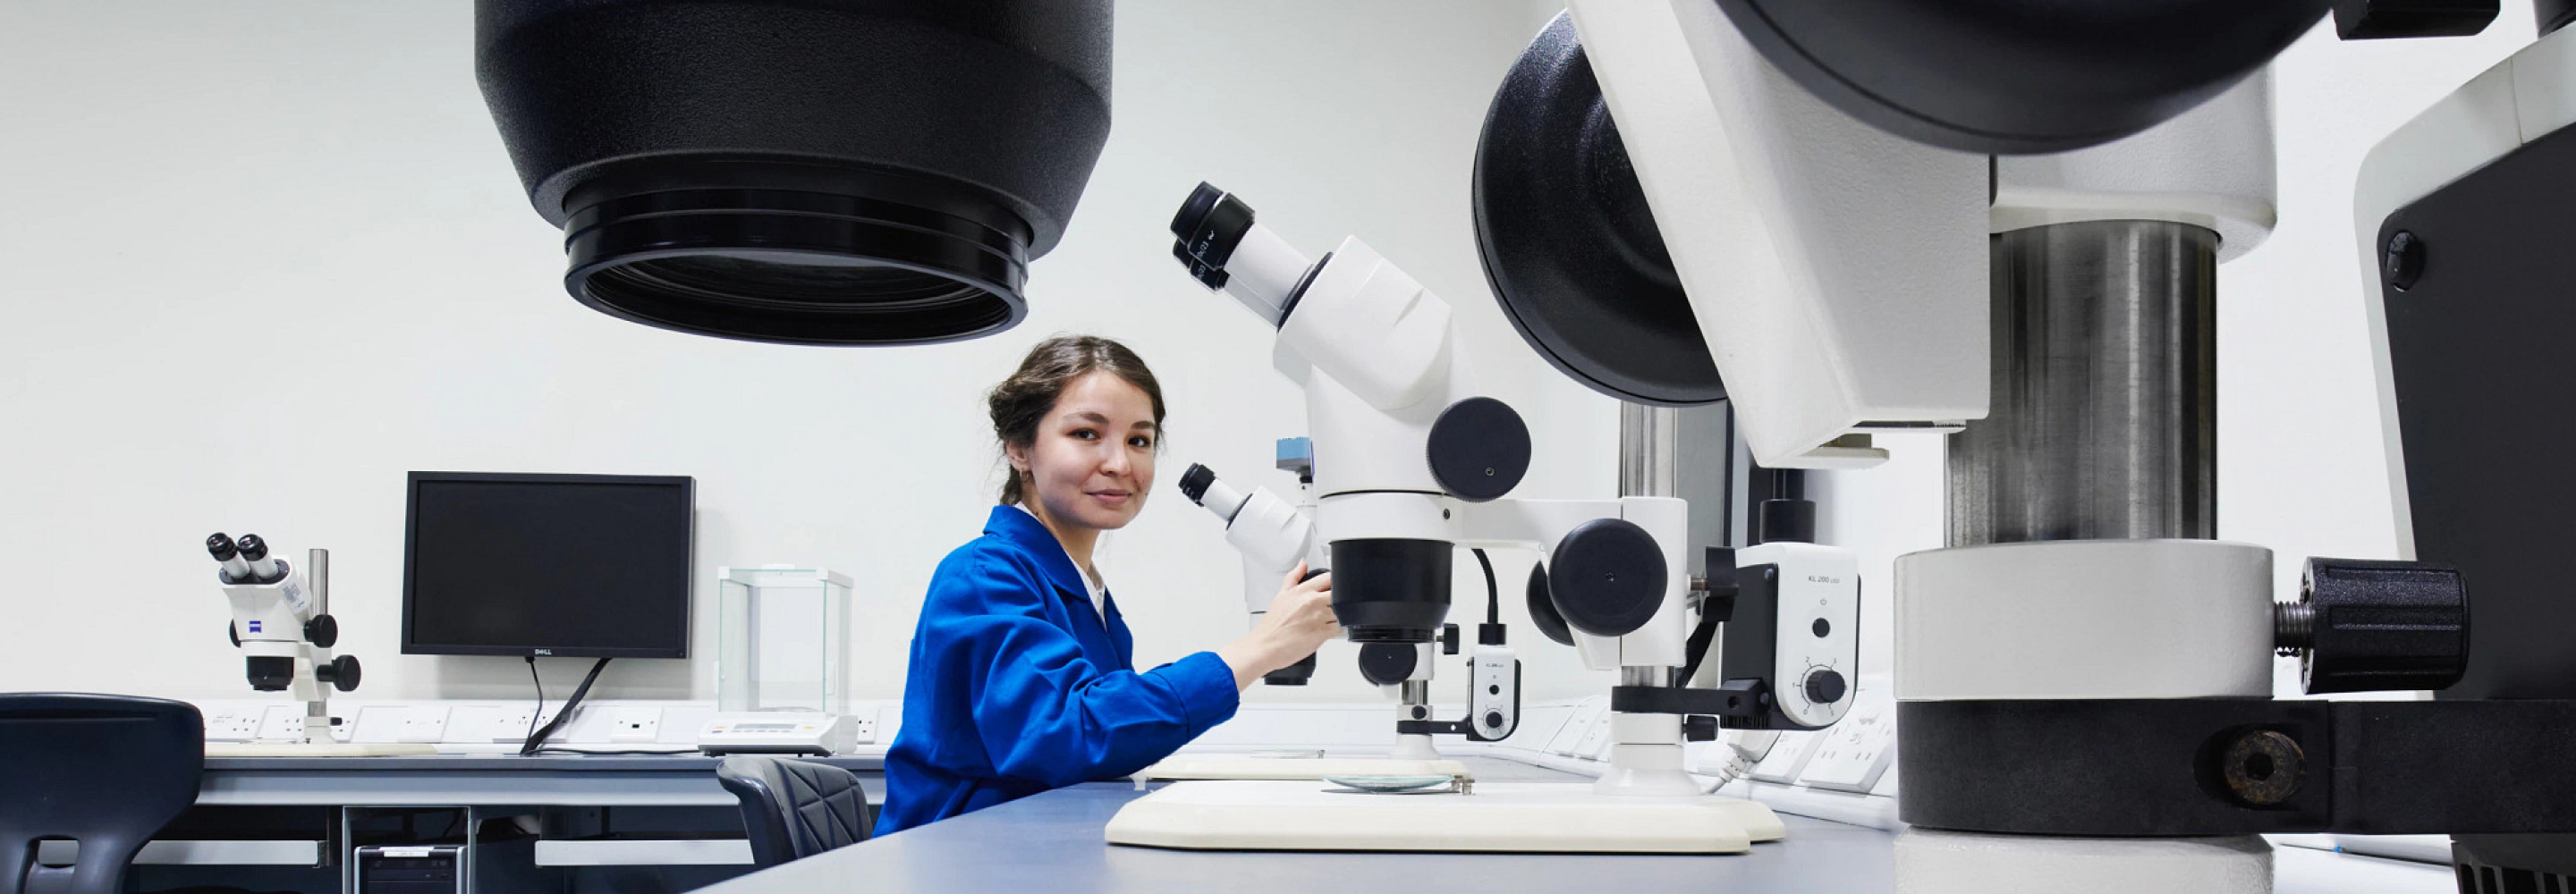 woman working with a microscope in a lab